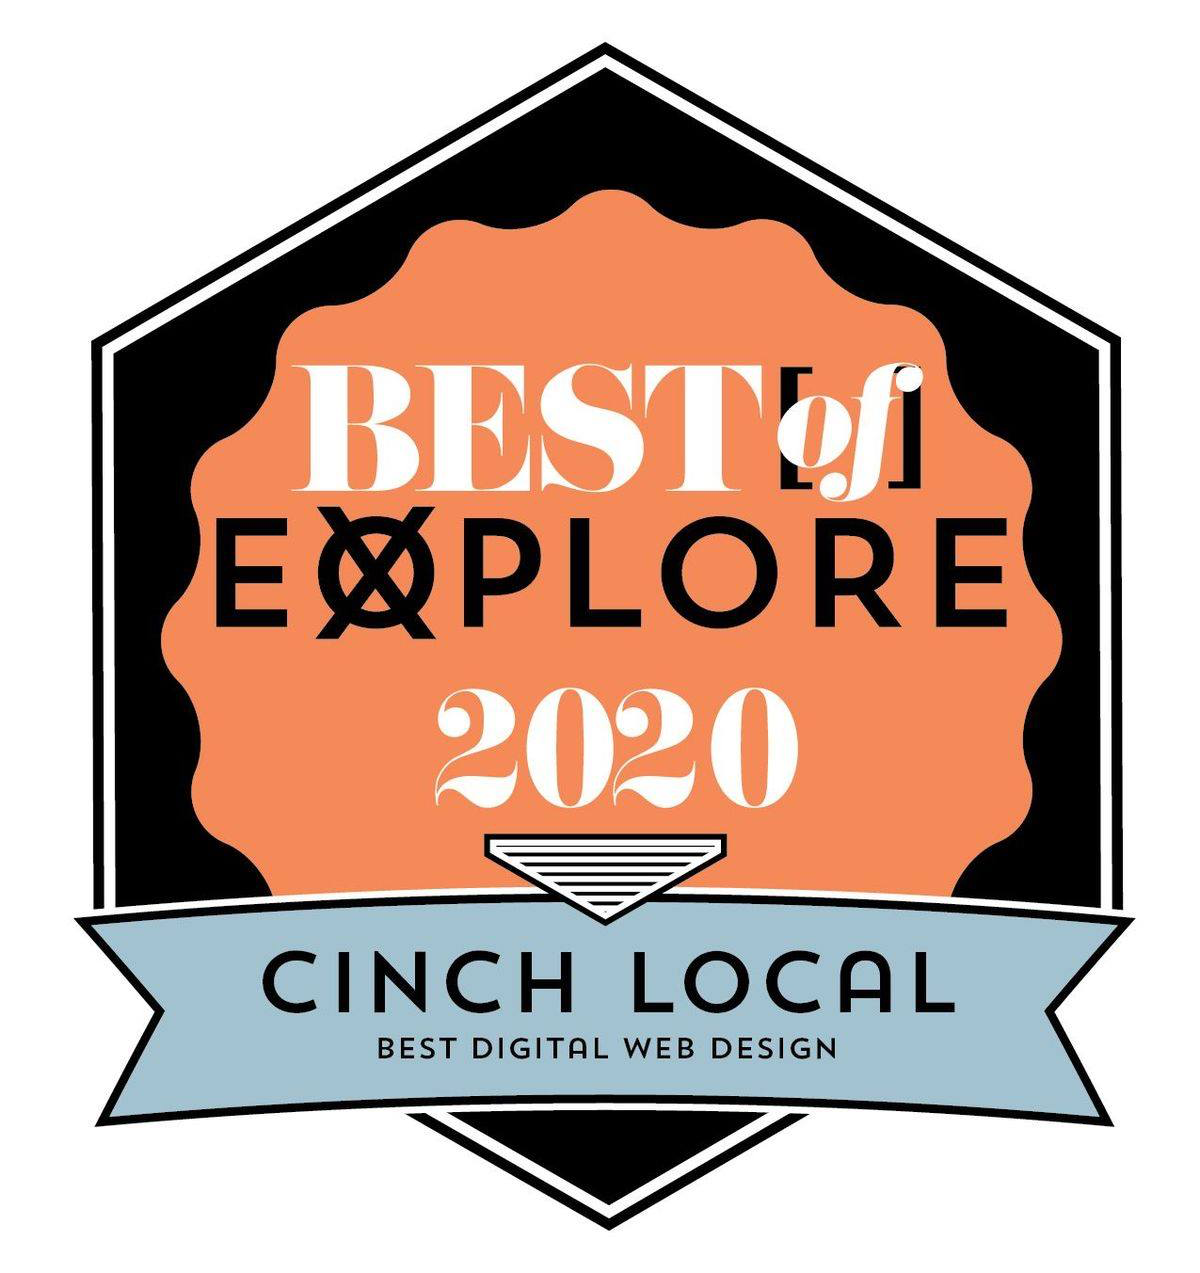 A badge that says `` best of explore 2020 cinch local ''